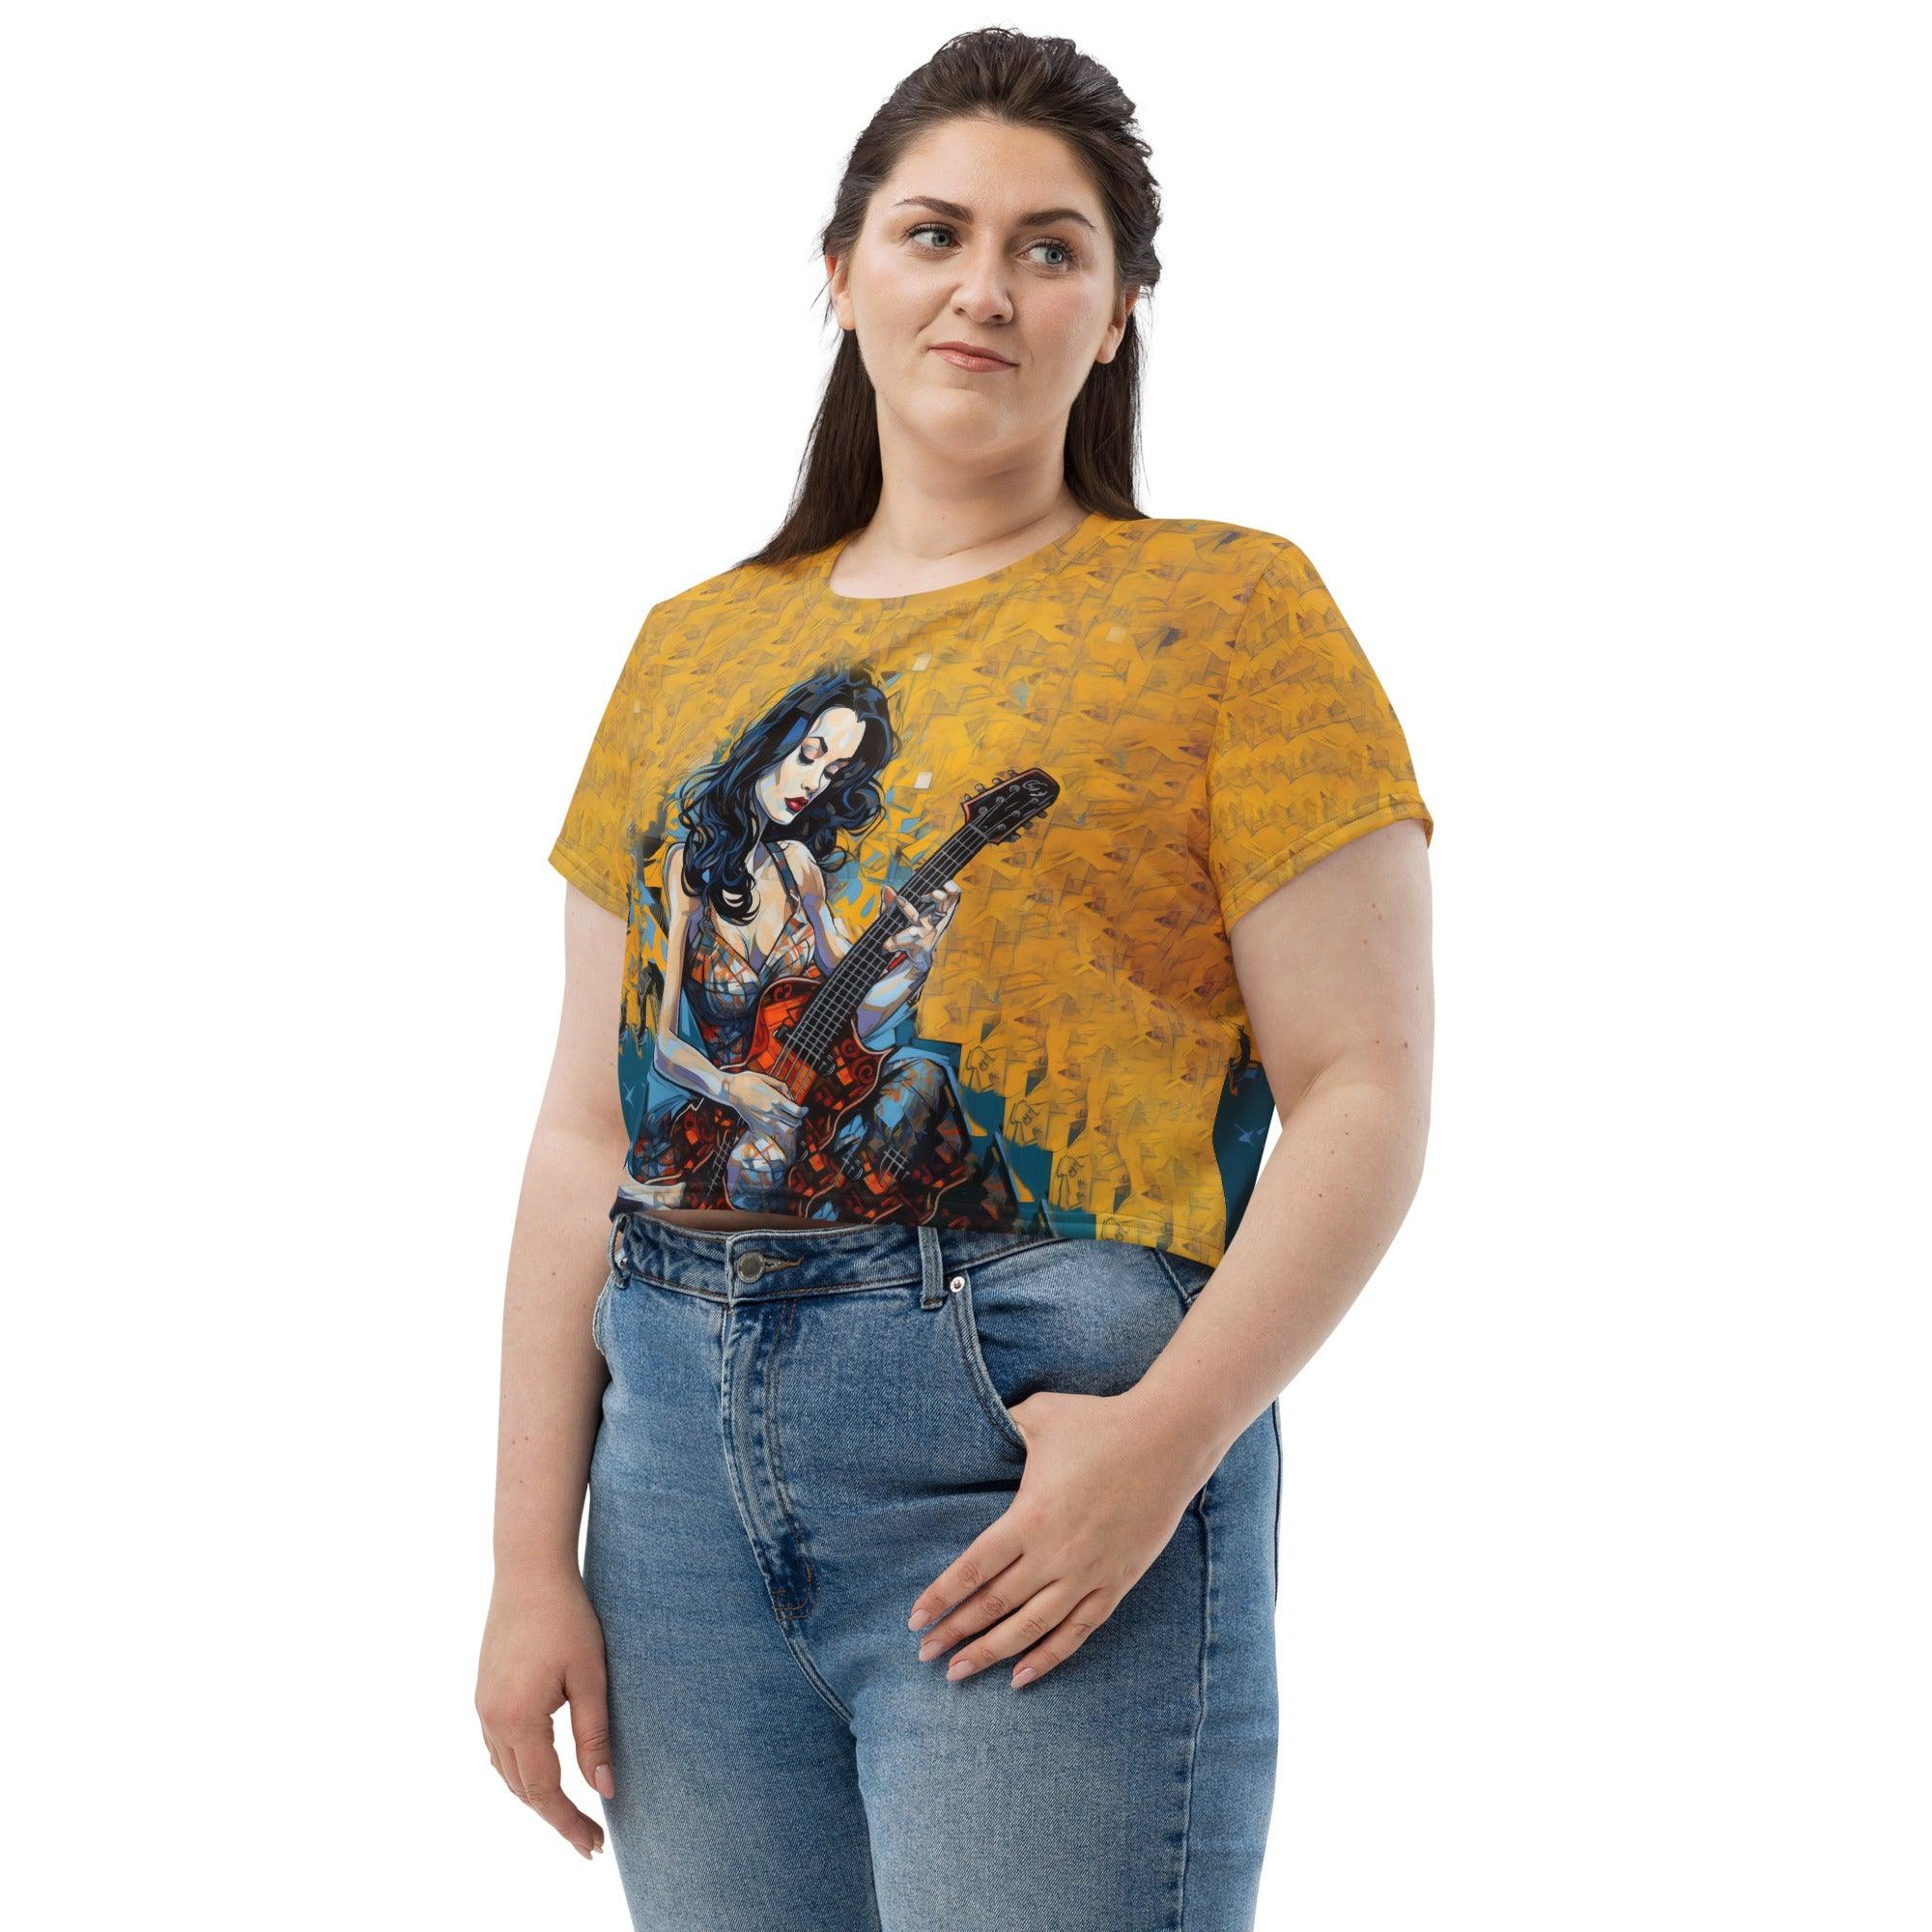 Fashionable Crop Top with Guitar Design